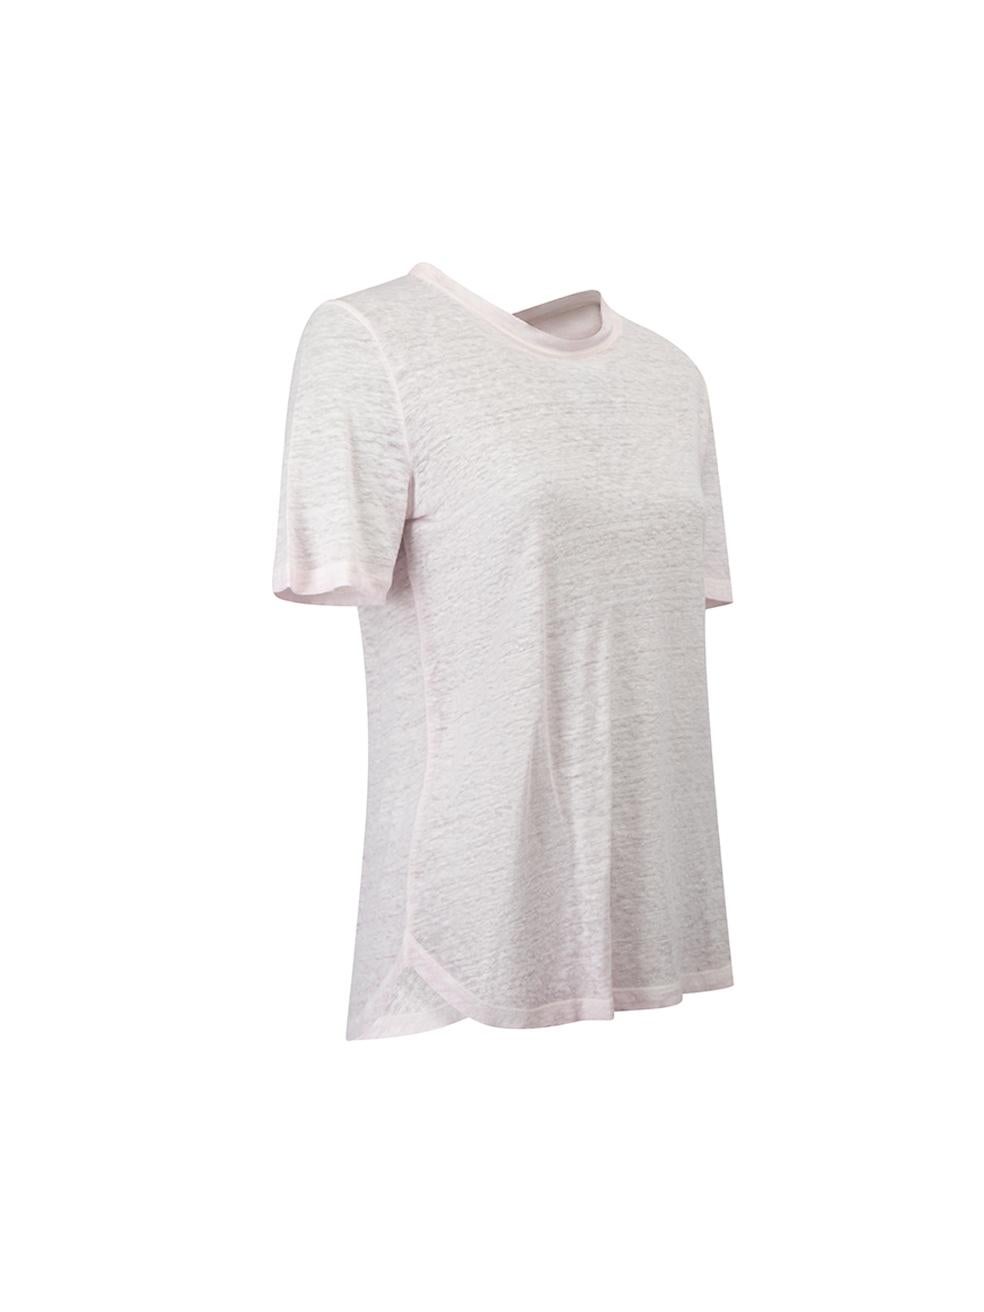 CONDITION is Very good. Minimal wear to top is evident. Minimal wear to the centre-front with a faint mark on this used Maje designer resale item. 



Details


Pink

Linen

Short sleeves T shirt

Round neckline





Made in